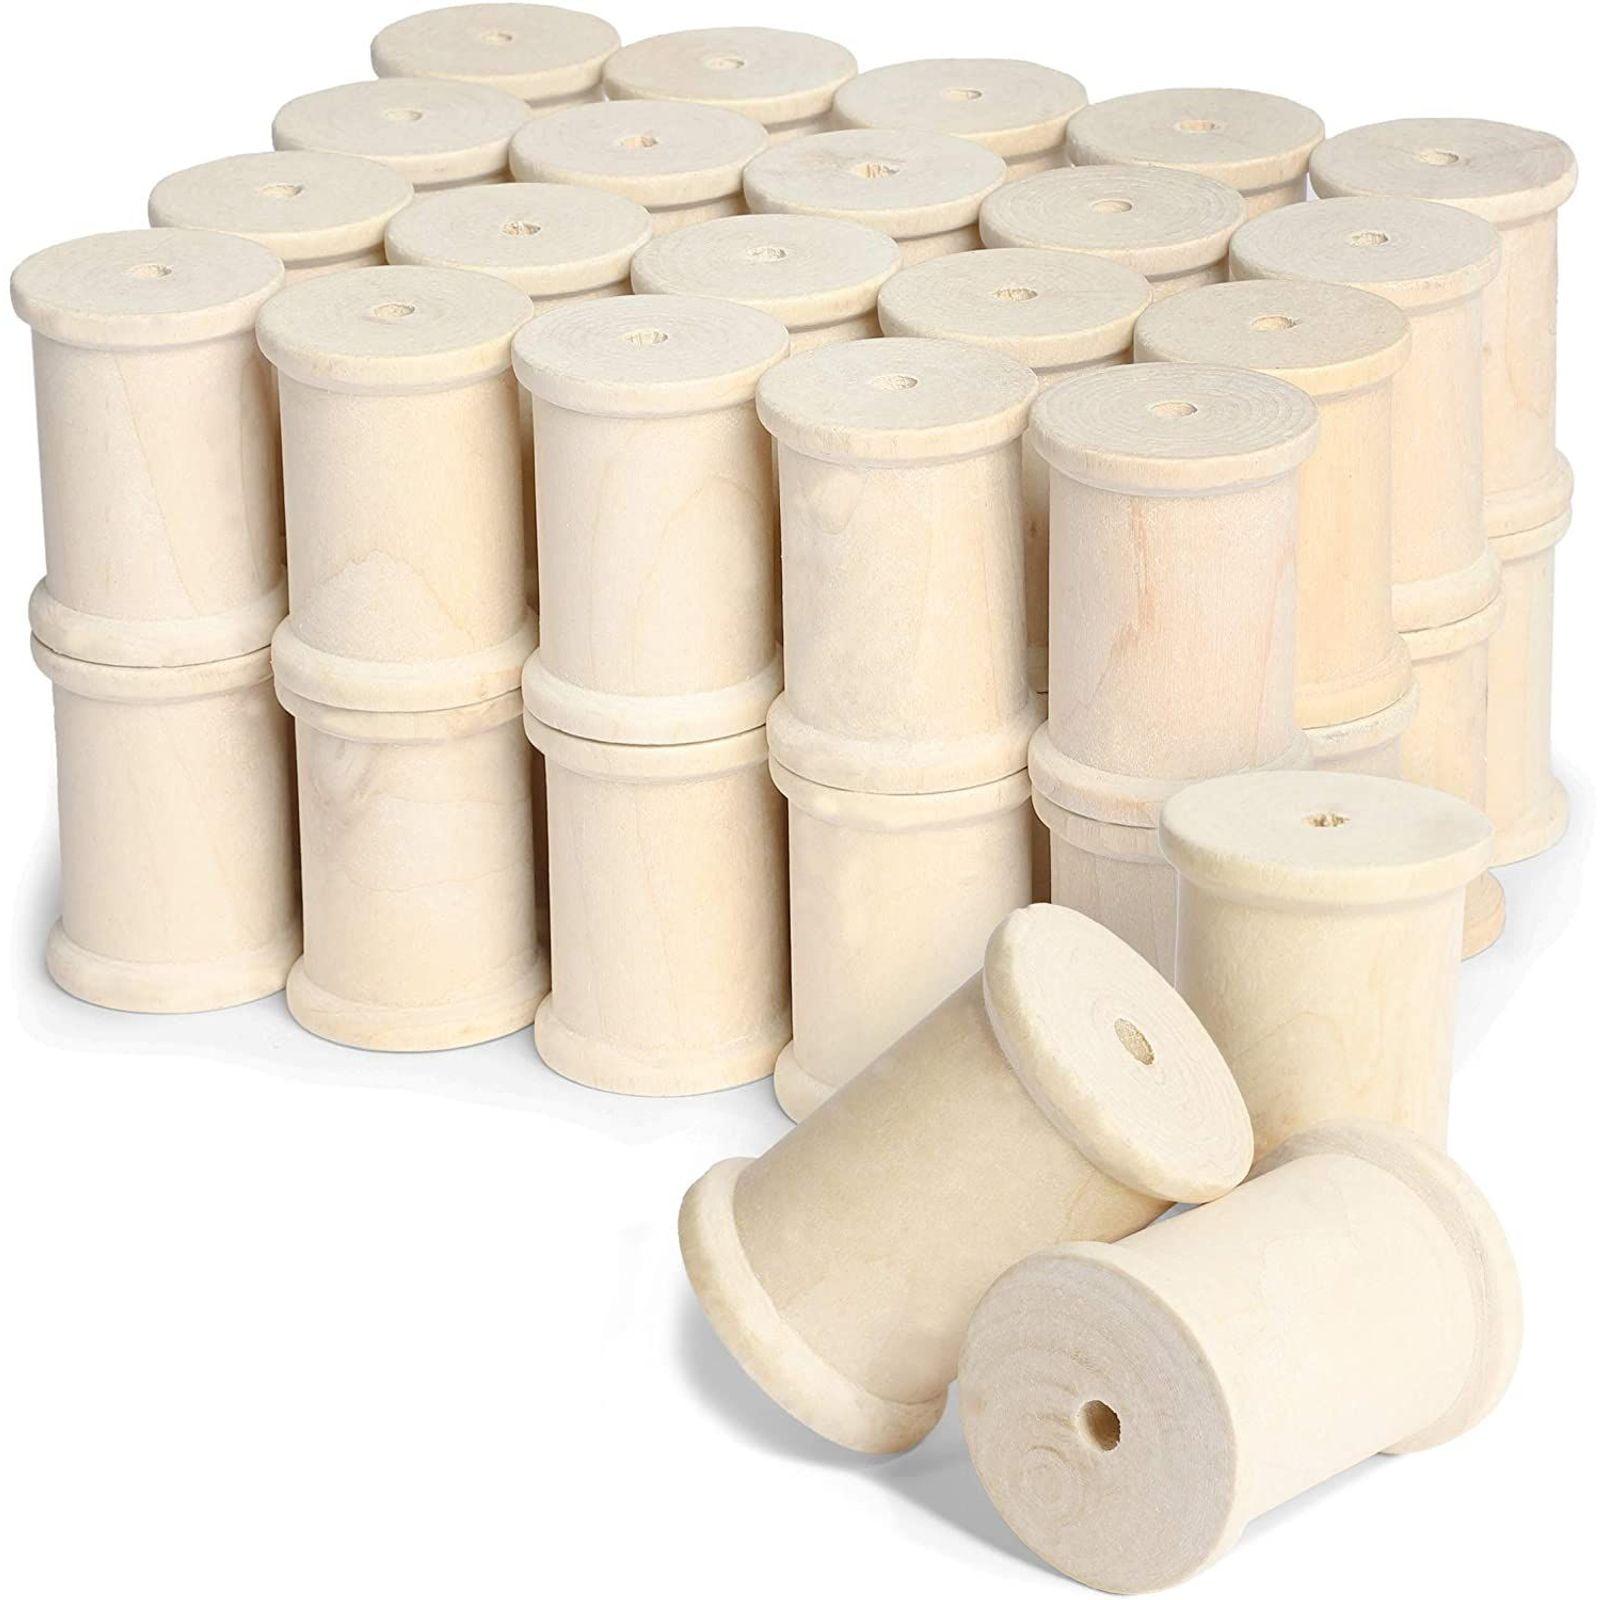 Bright Creations 40-Pack Large Unfinished Wooden Spools for Crafts 1.5 x 2 in